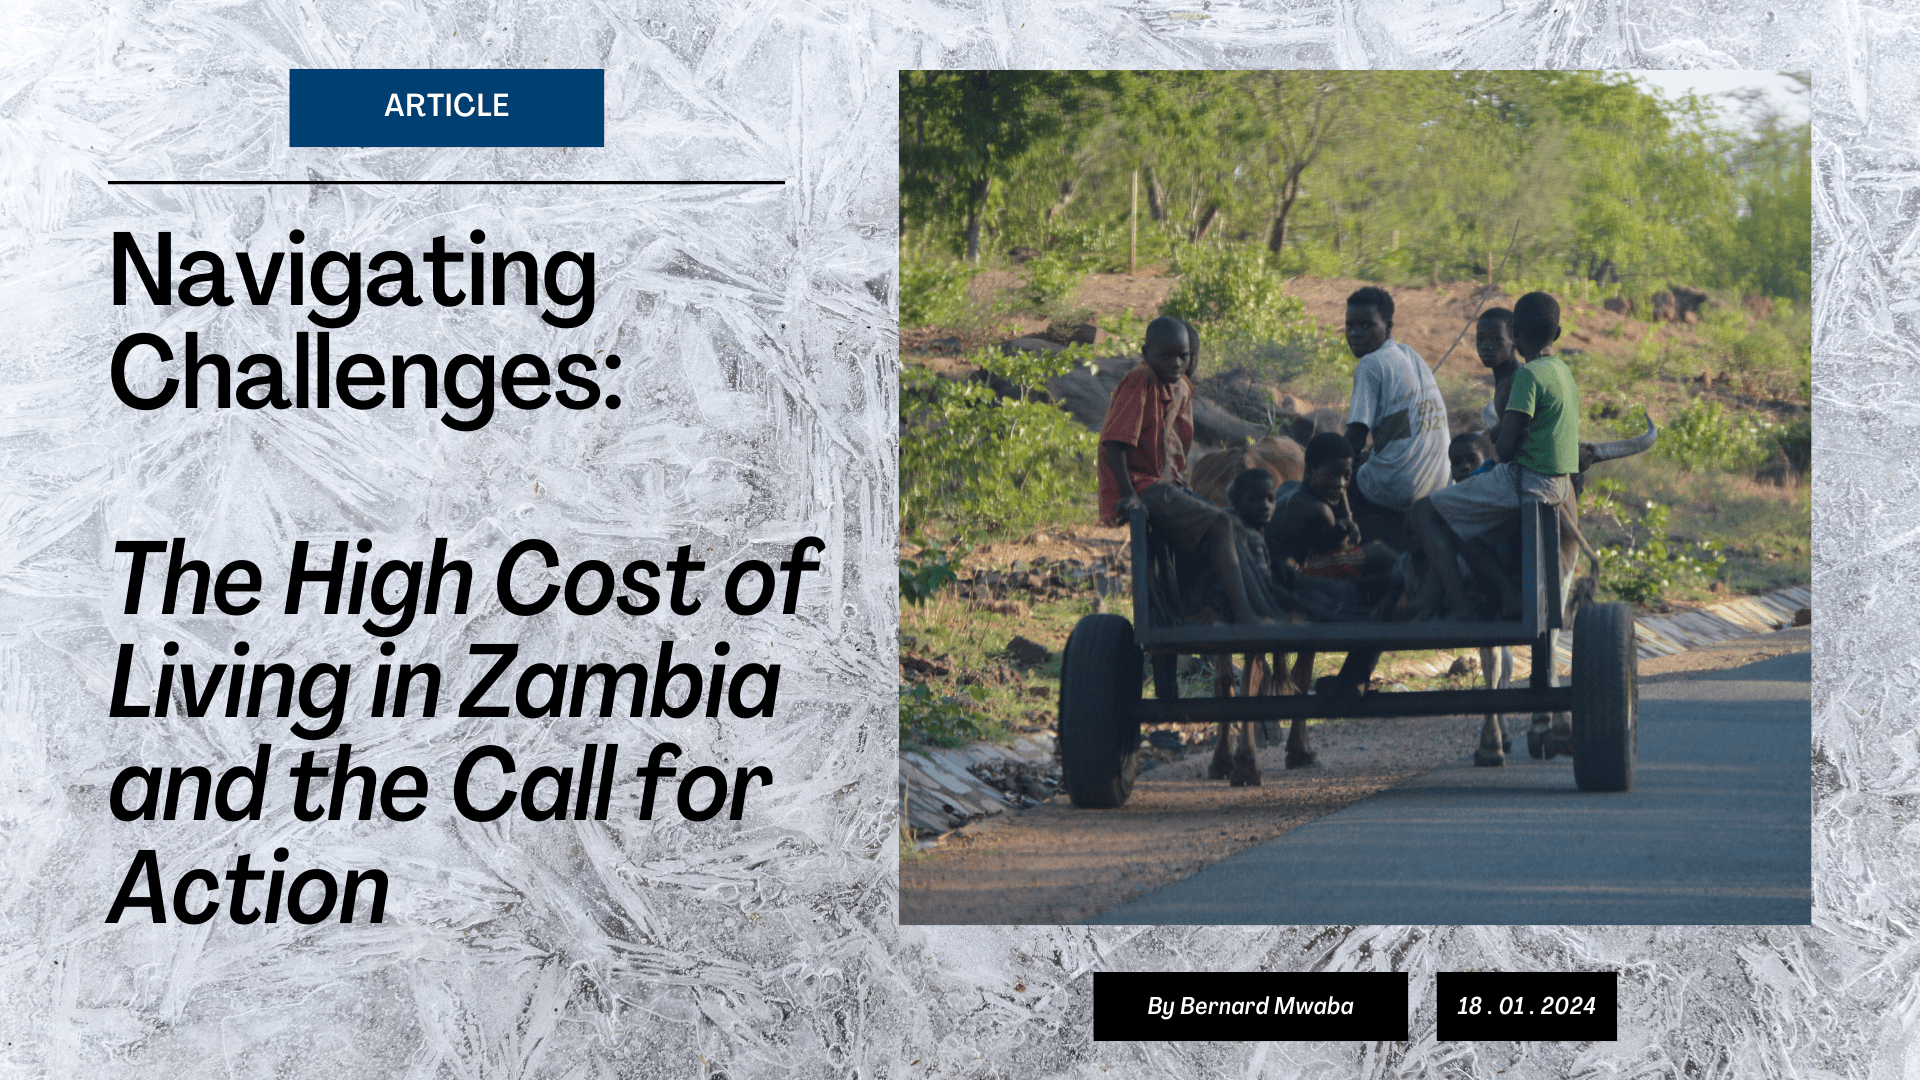 Zambia's High Cost of Living & a Call for Articles